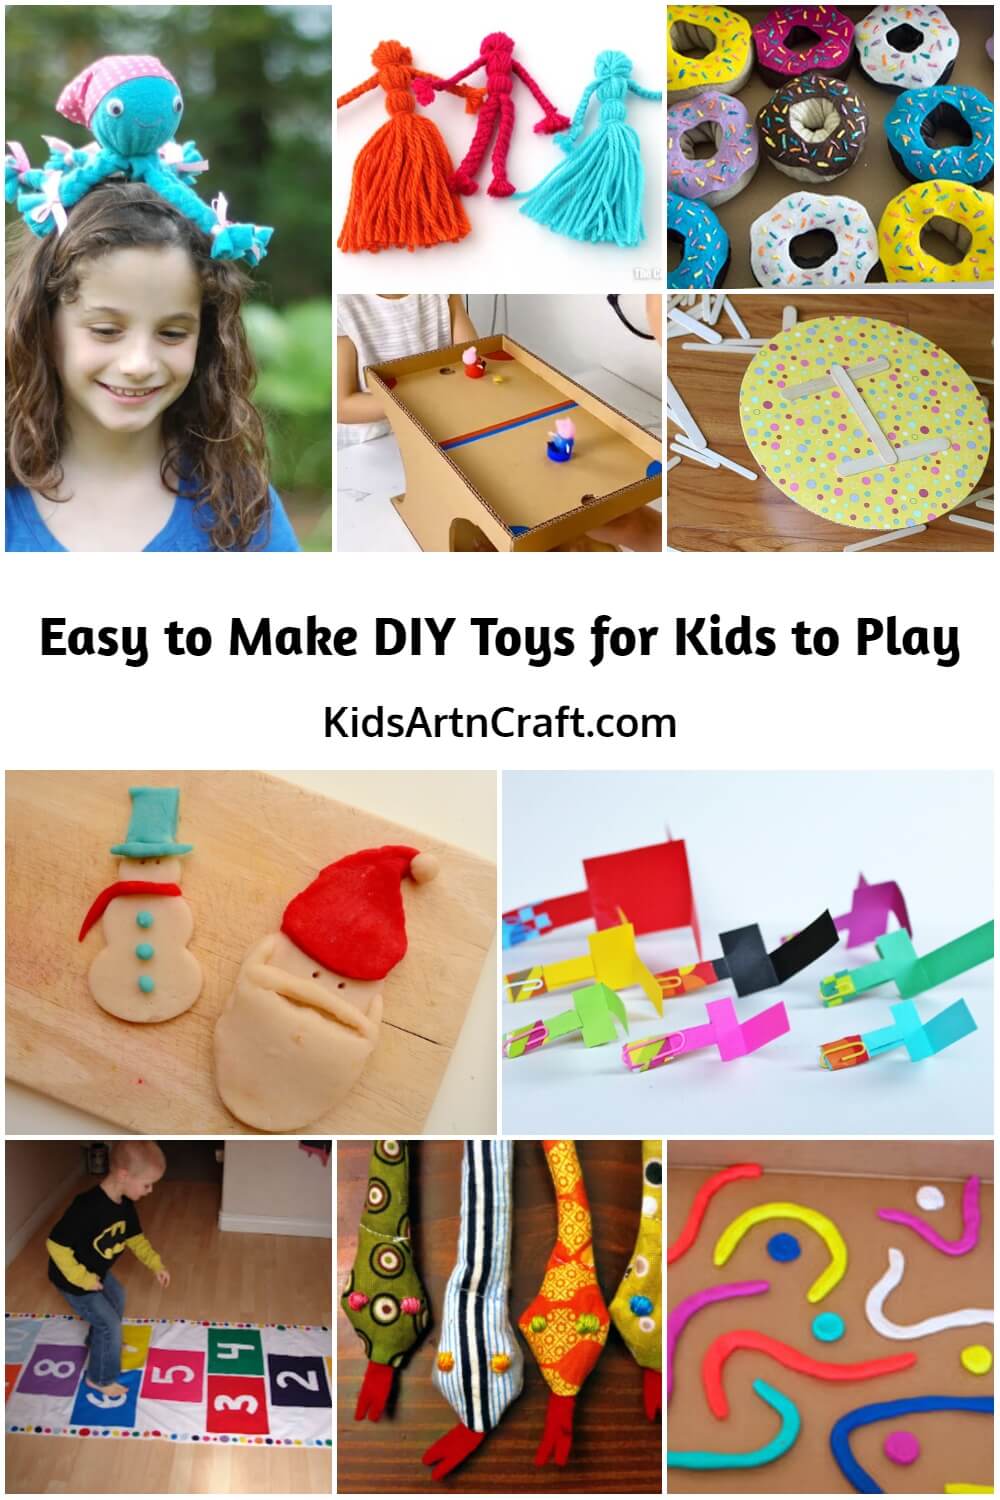 Easy to Make DIY Toys for Kids to Play